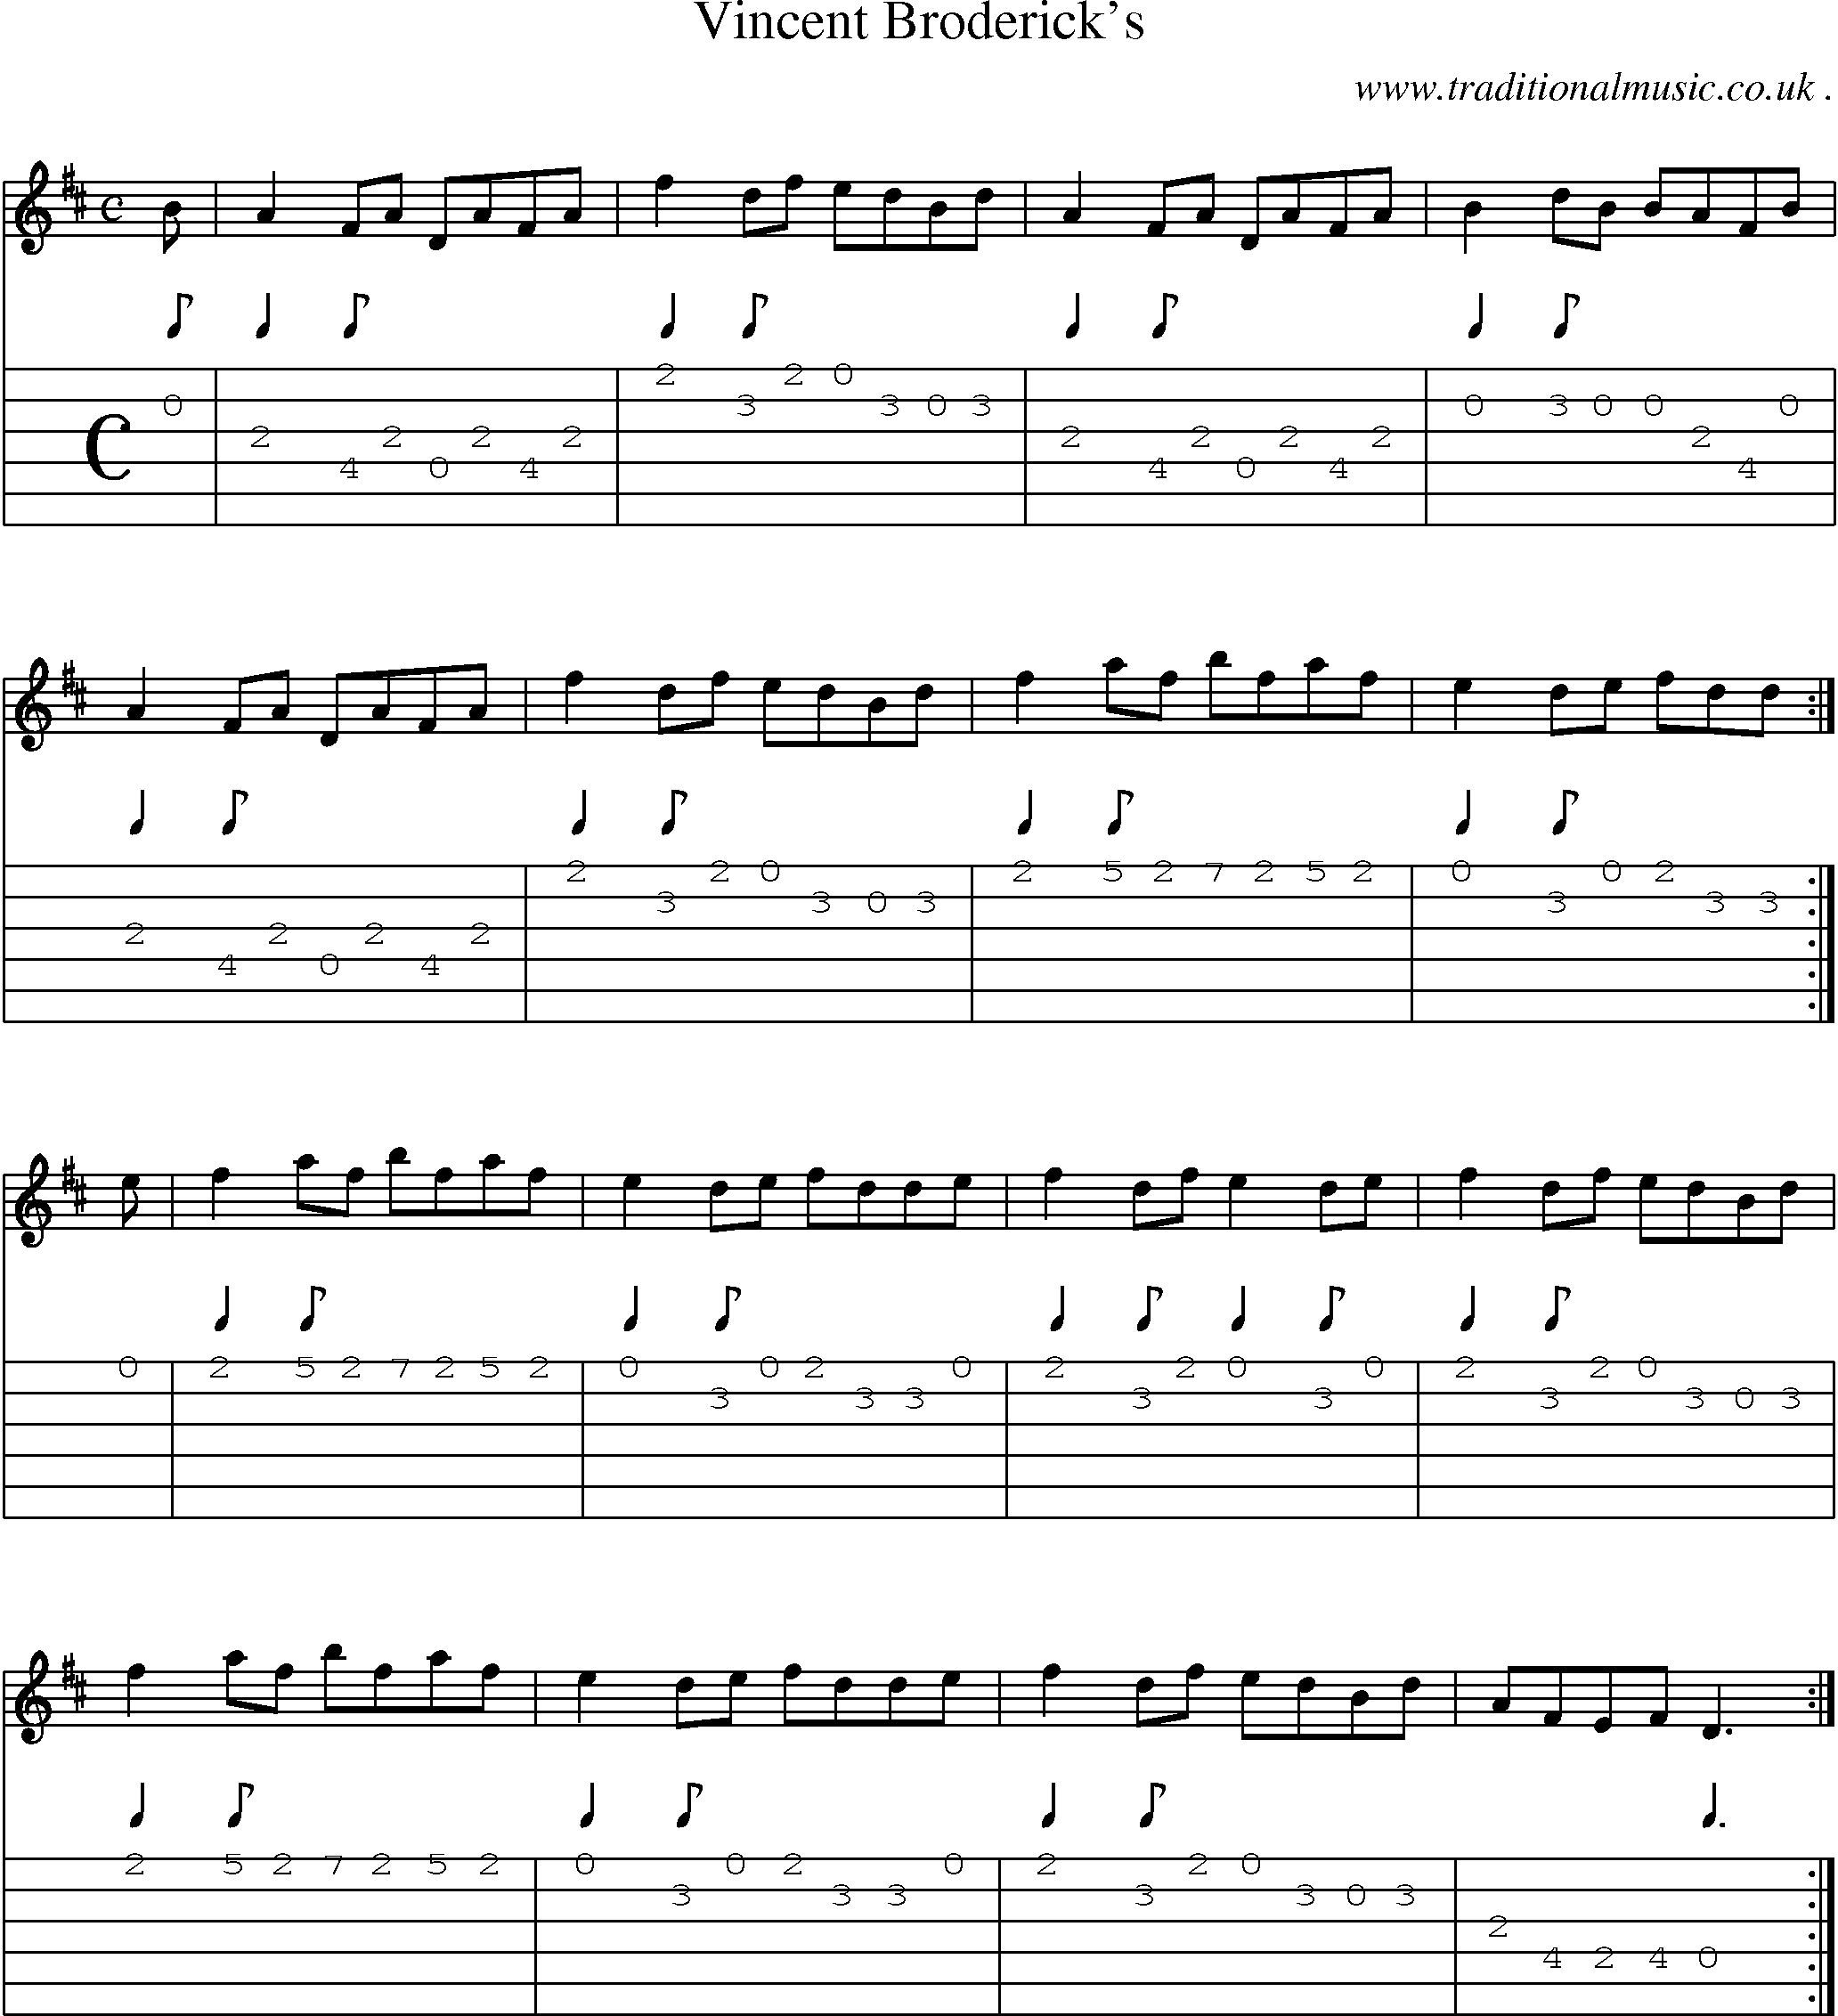 Sheet-Music and Guitar Tabs for Vincent Brodericks